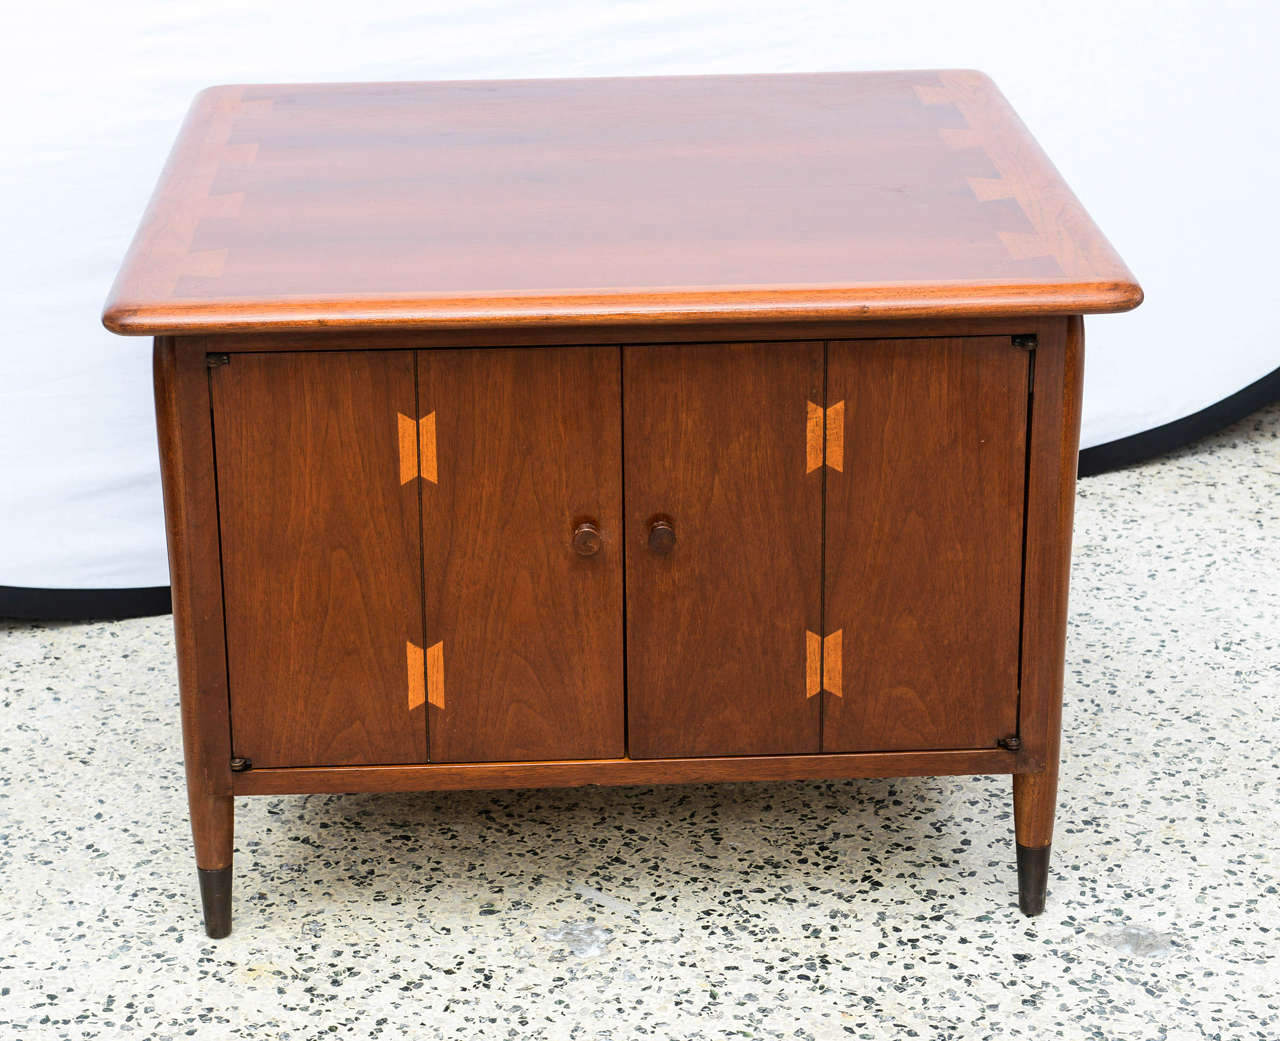 Beautiful inlaid wooden double door end tables/side tables from Acclaim series.  Made in the USA 1960